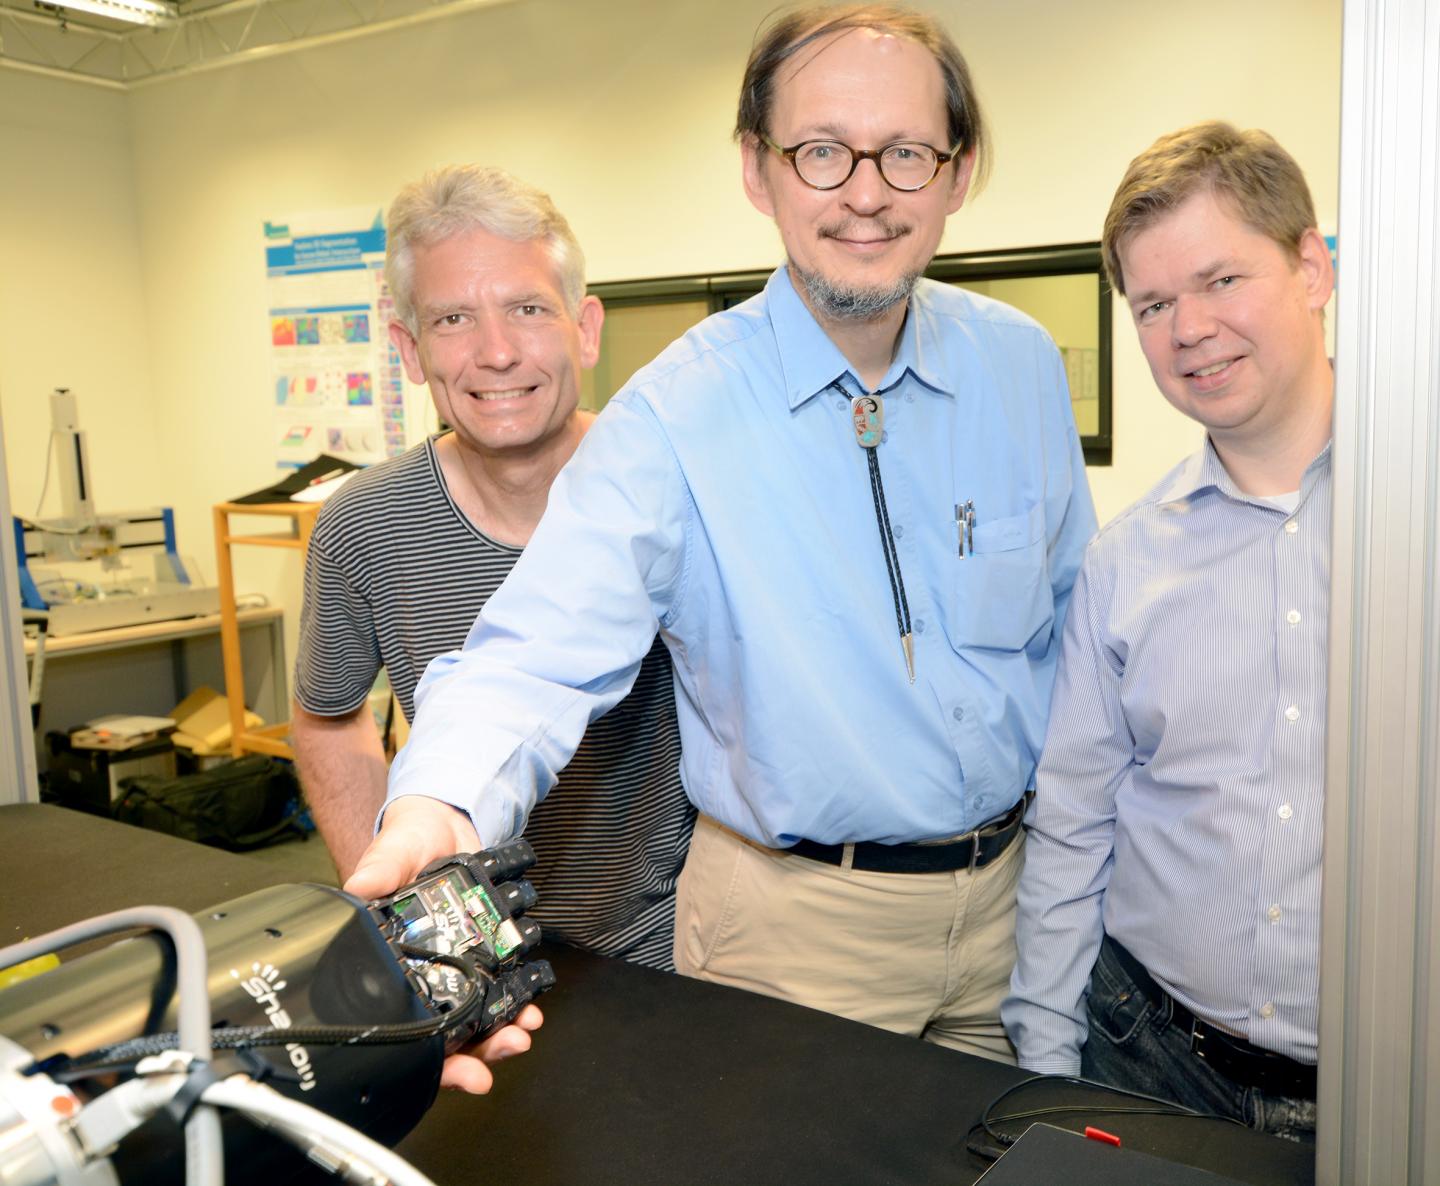 Some of the FAMULA team, shaking hands with their robot. (Credit: Bielefeld University)